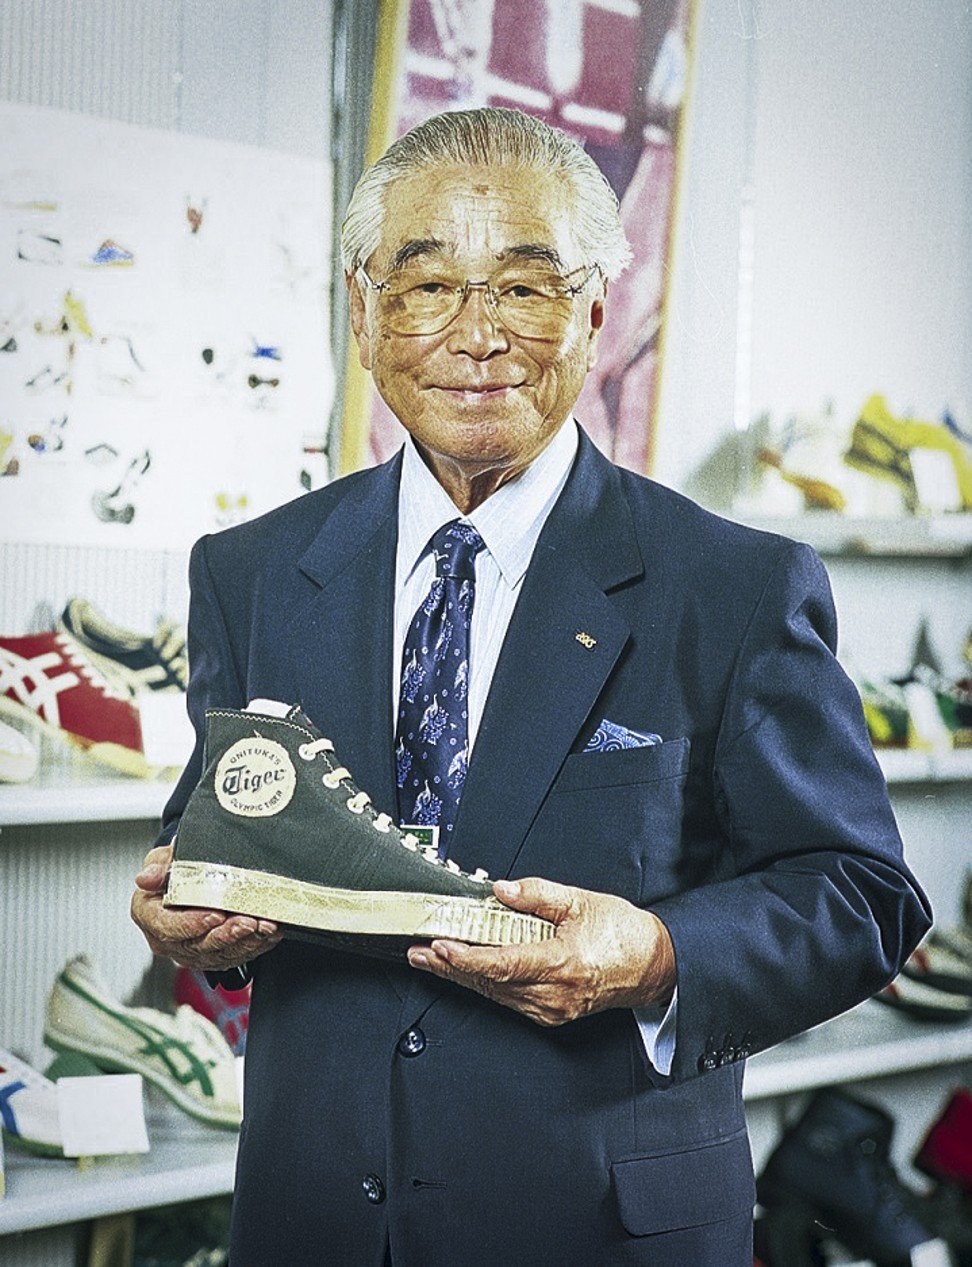 onitsuka tiger founder cheap online